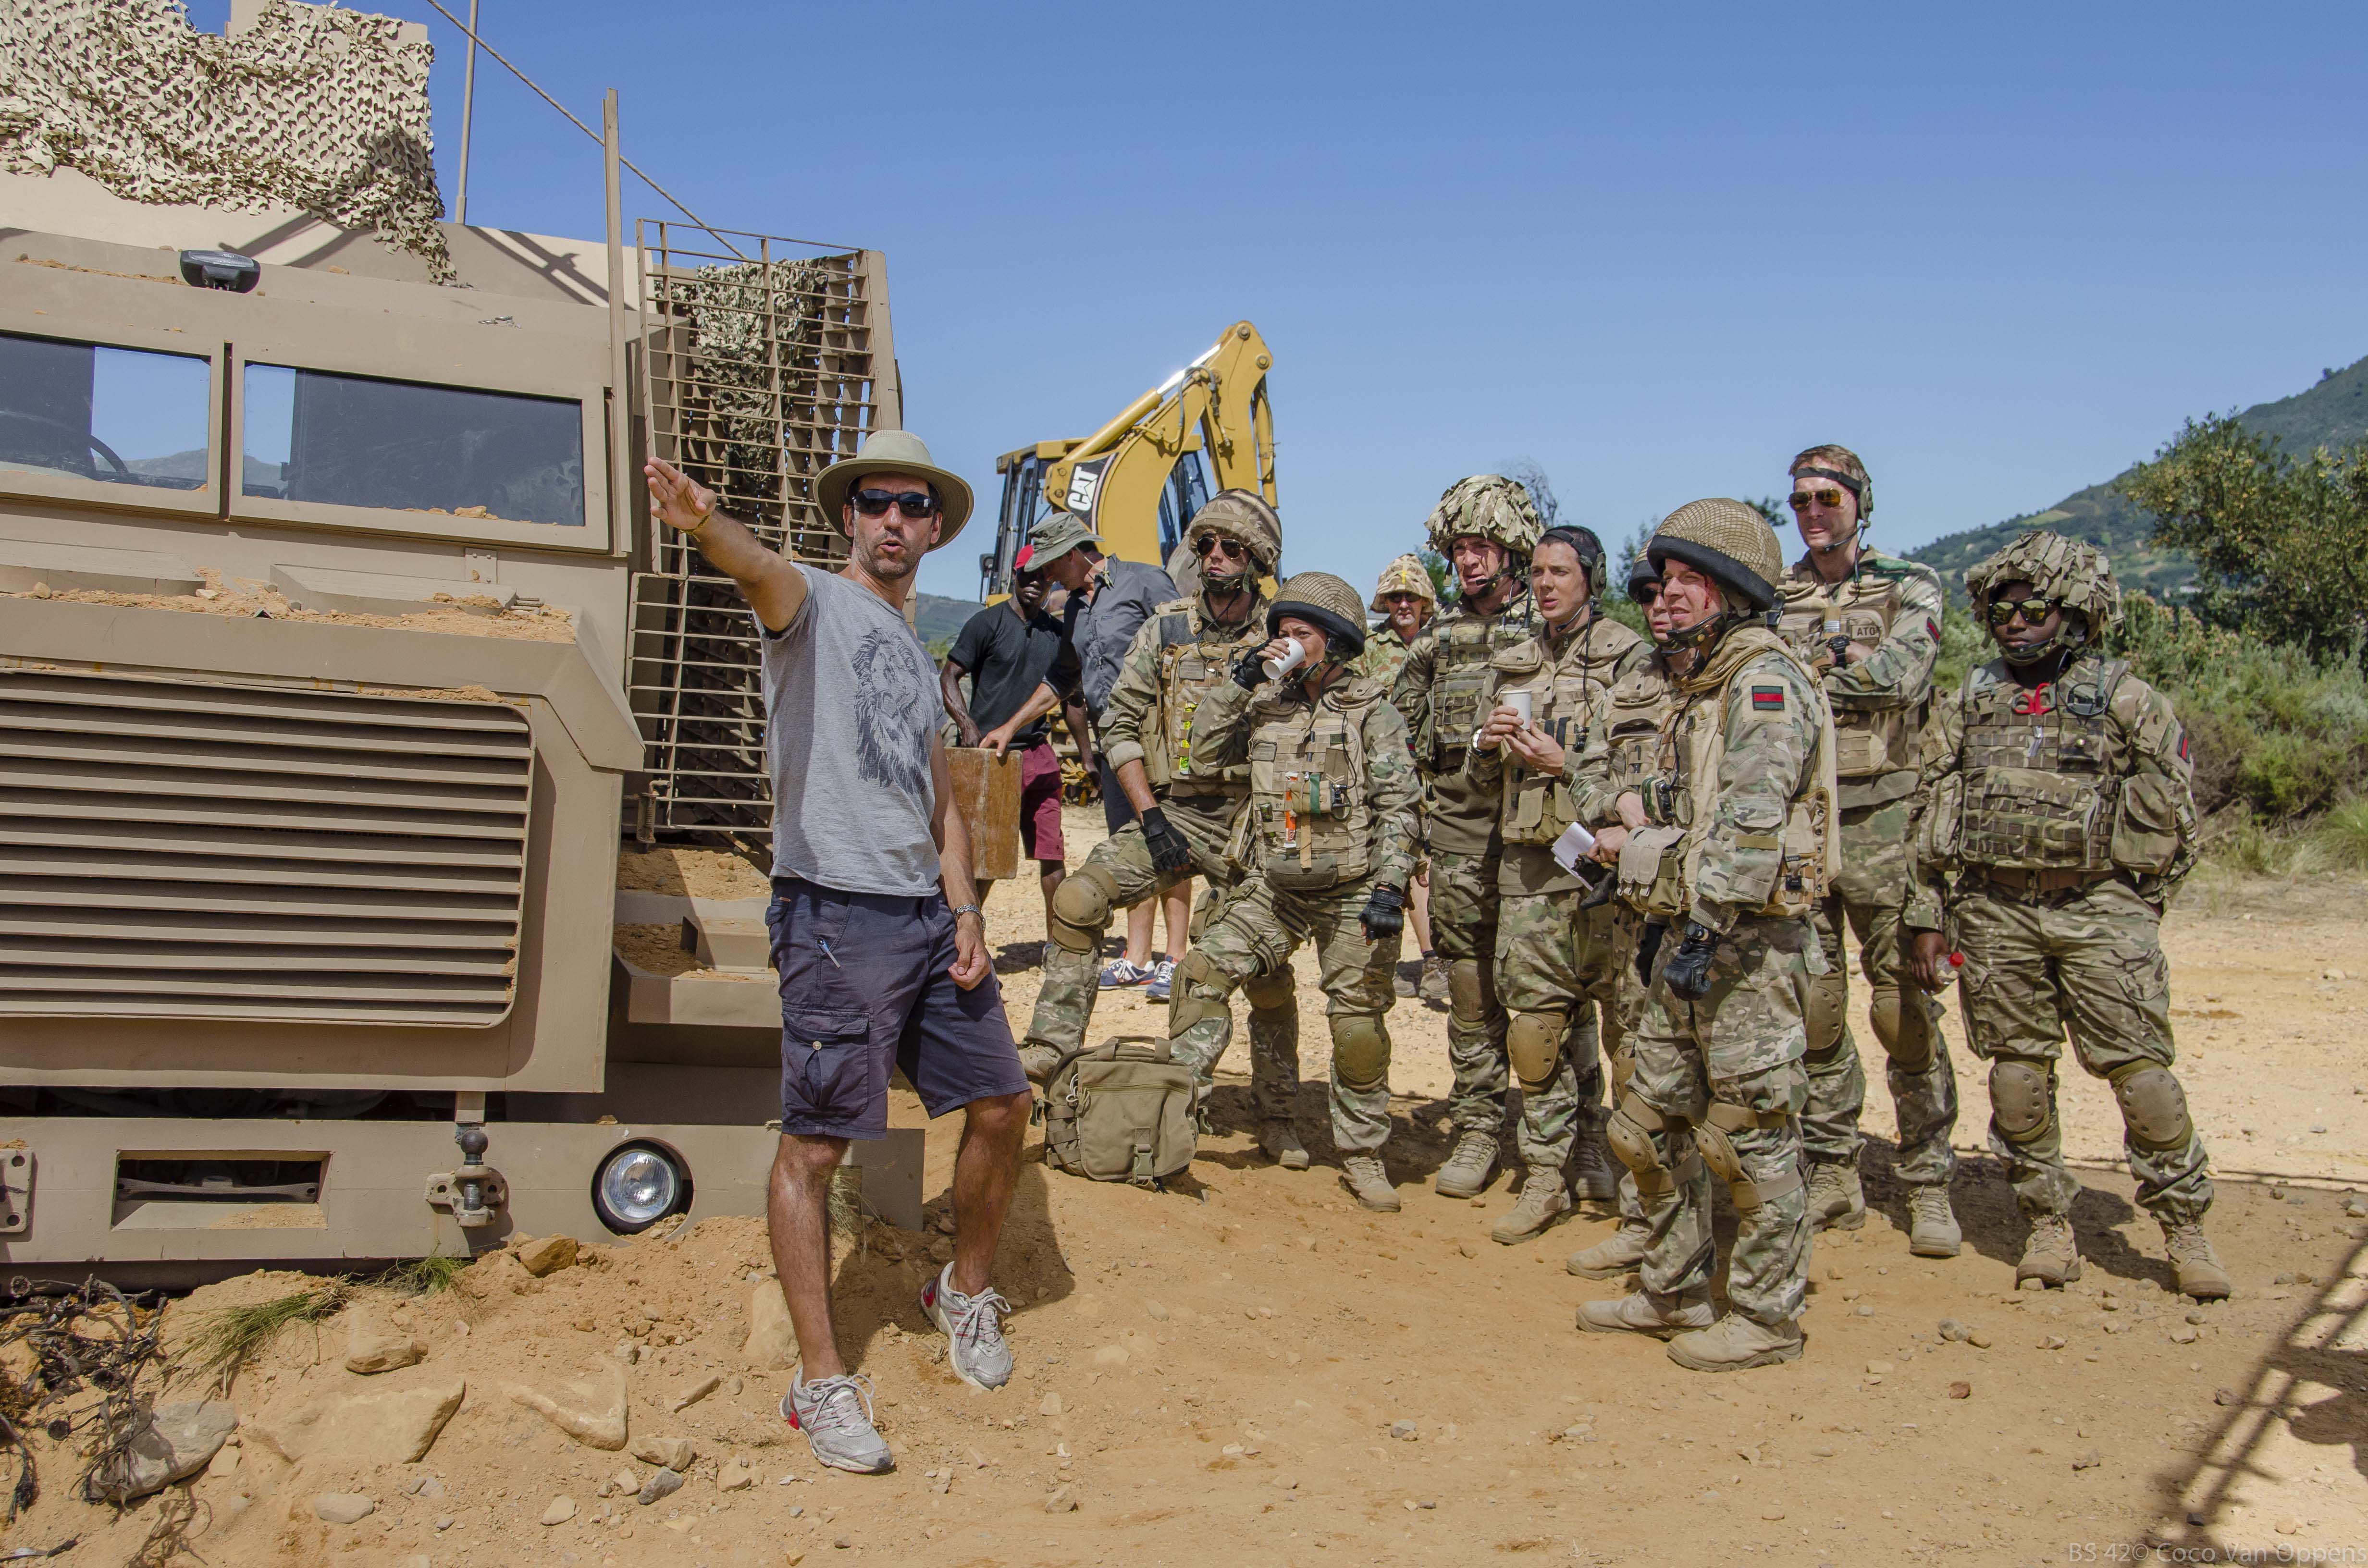 David Sant on the set of Bluestone 42 with the cast.